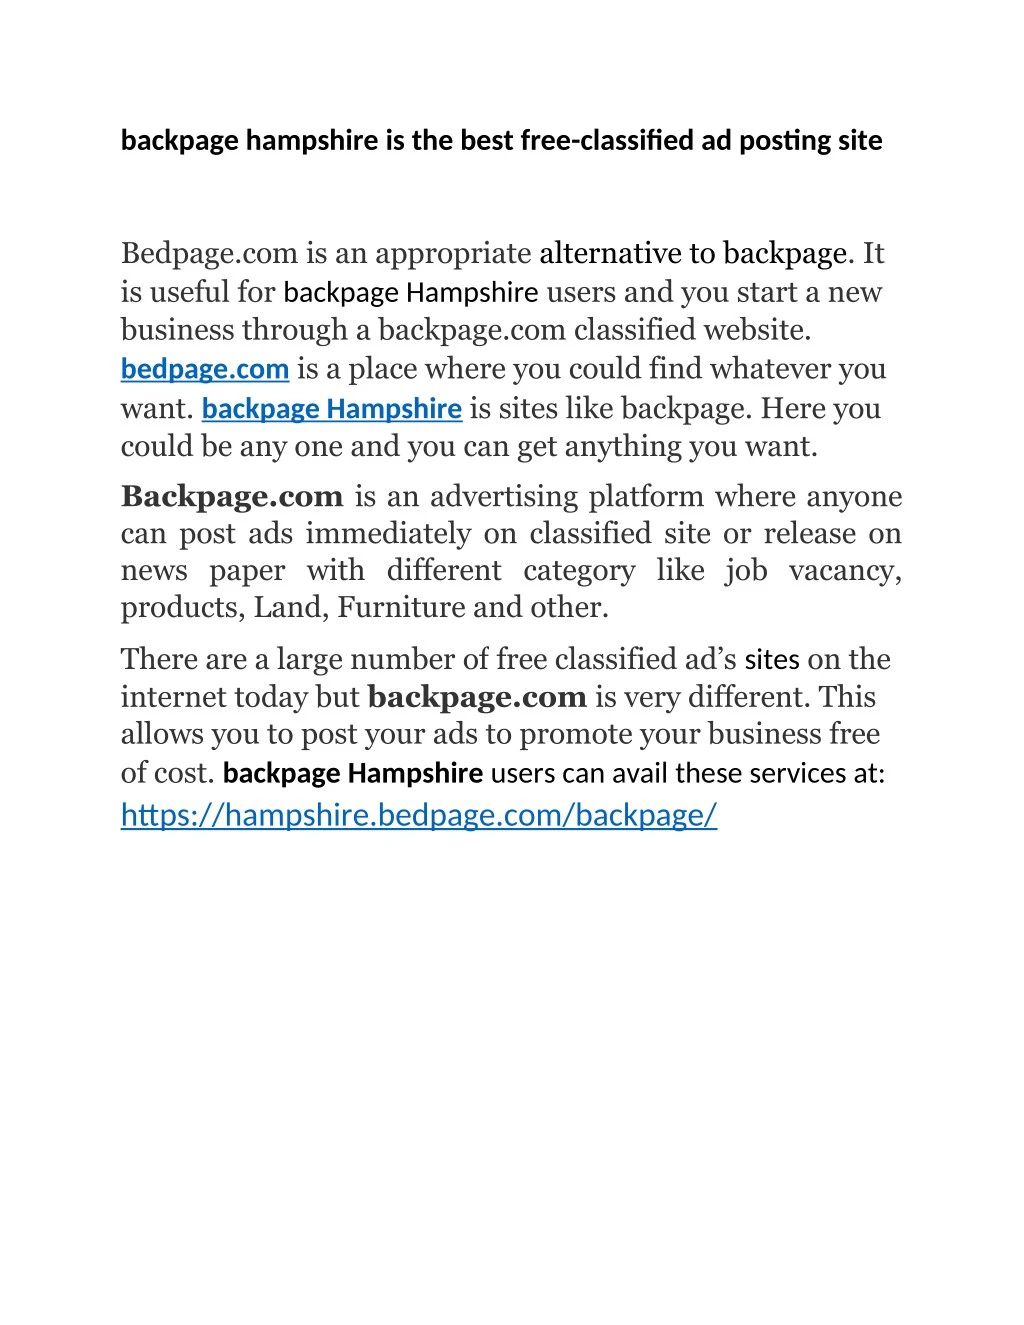 backpage hampshire is the best free classified n.